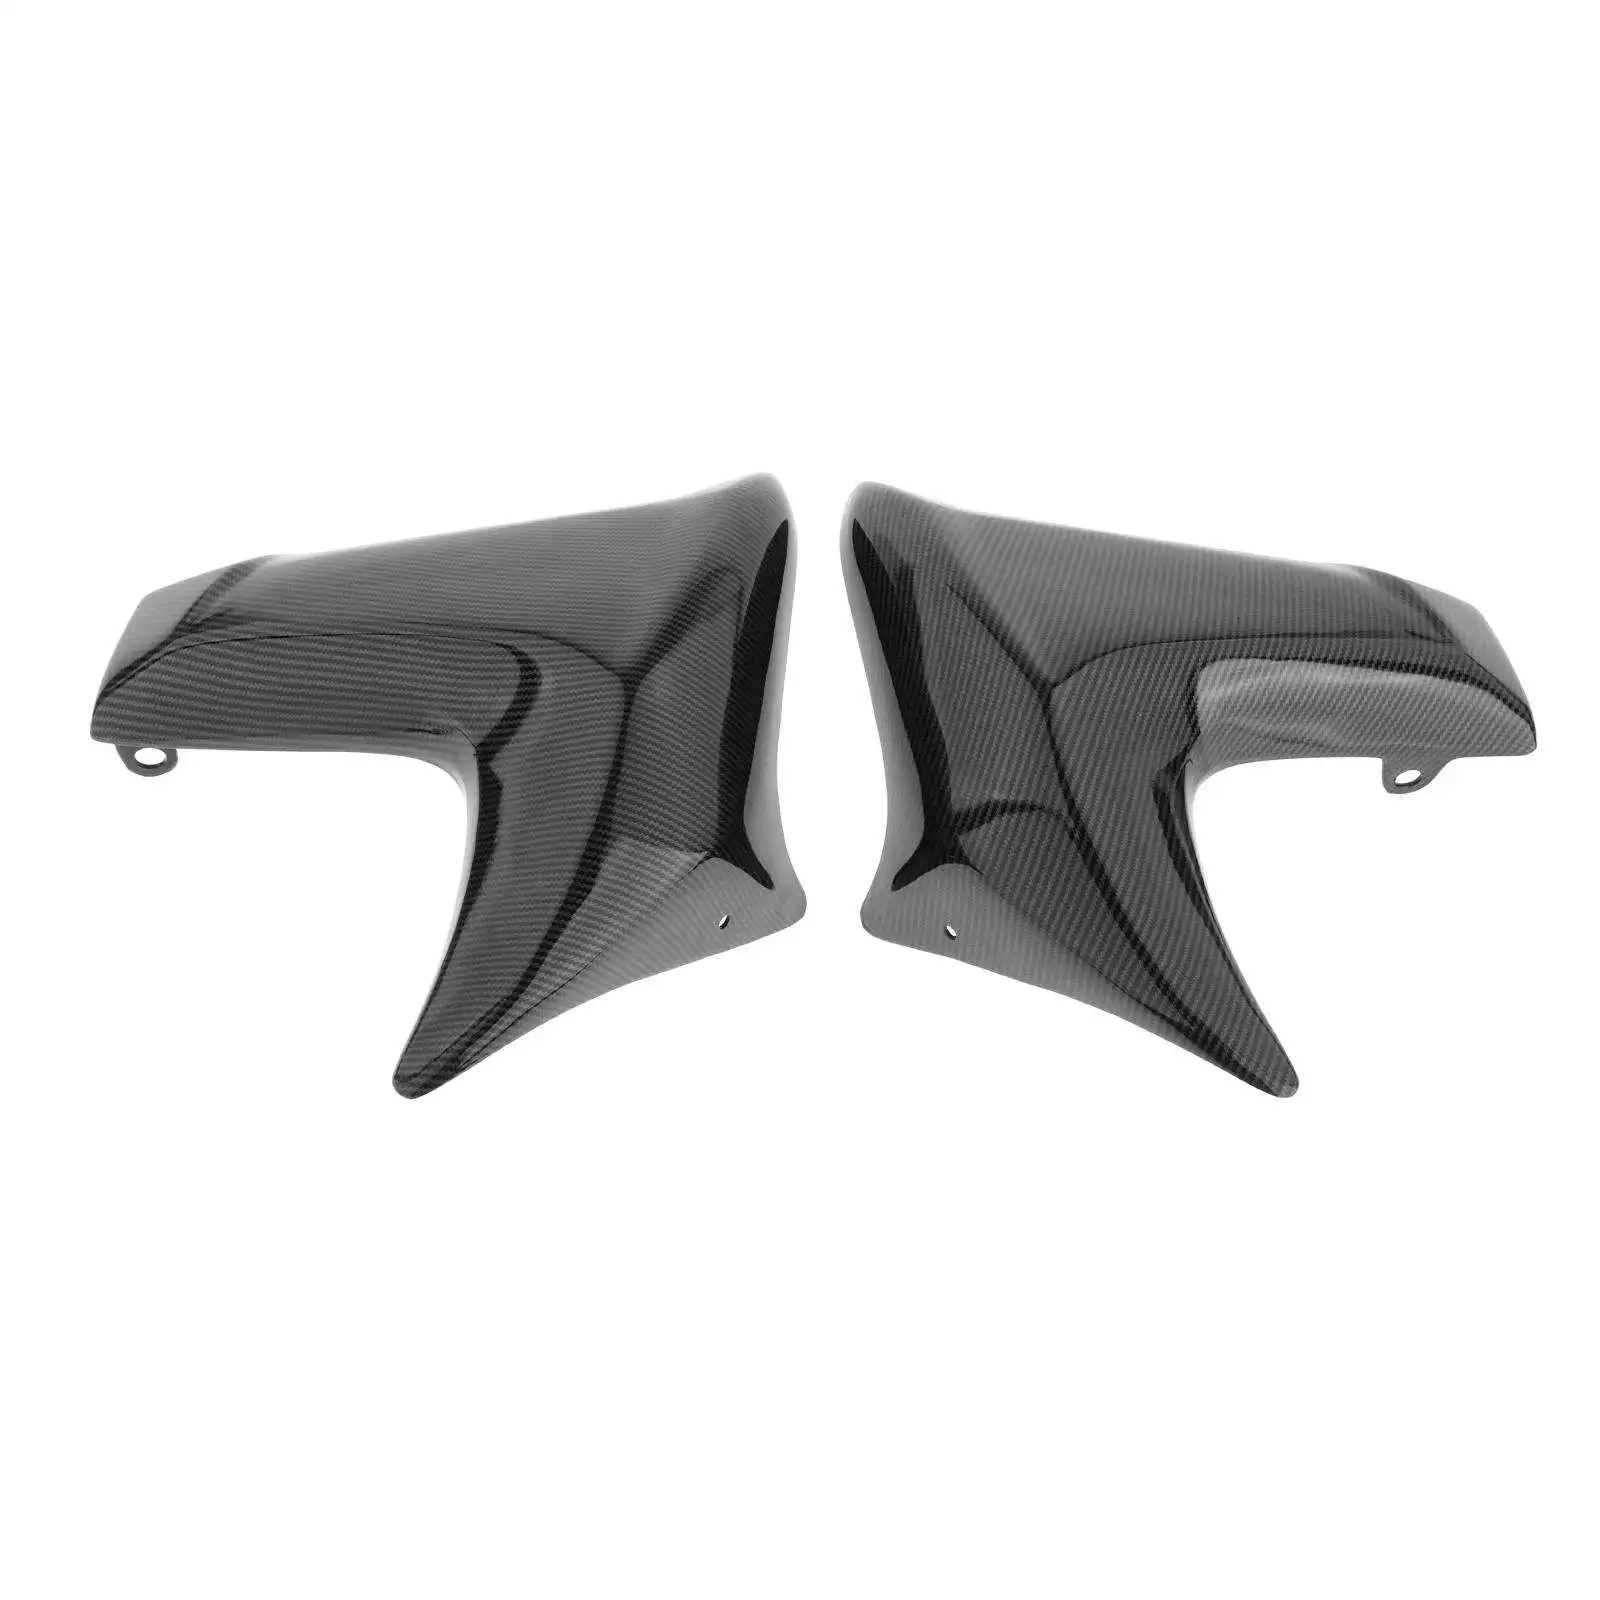 2Pcs Left Right Motorcycle Radiator Side Cowl Cover Fairing Replacement Fits for Kawasaki ER6N ER 6N 2012 2013 2014 2015 2016